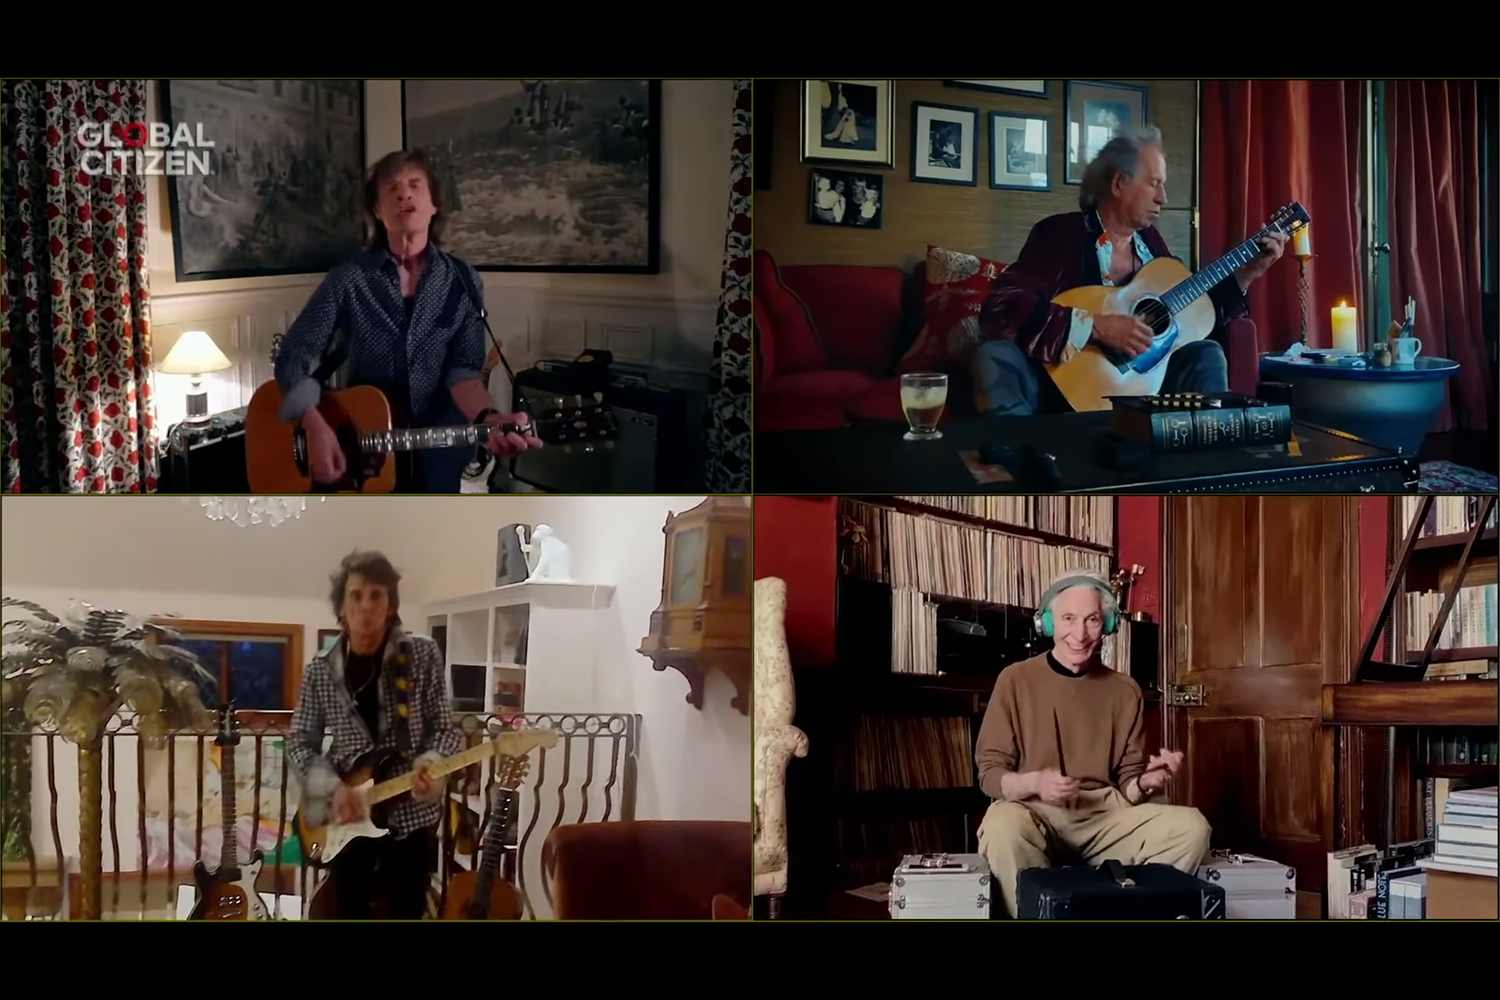 The Rolling Stones playing "You Can't Always Get What You Want"